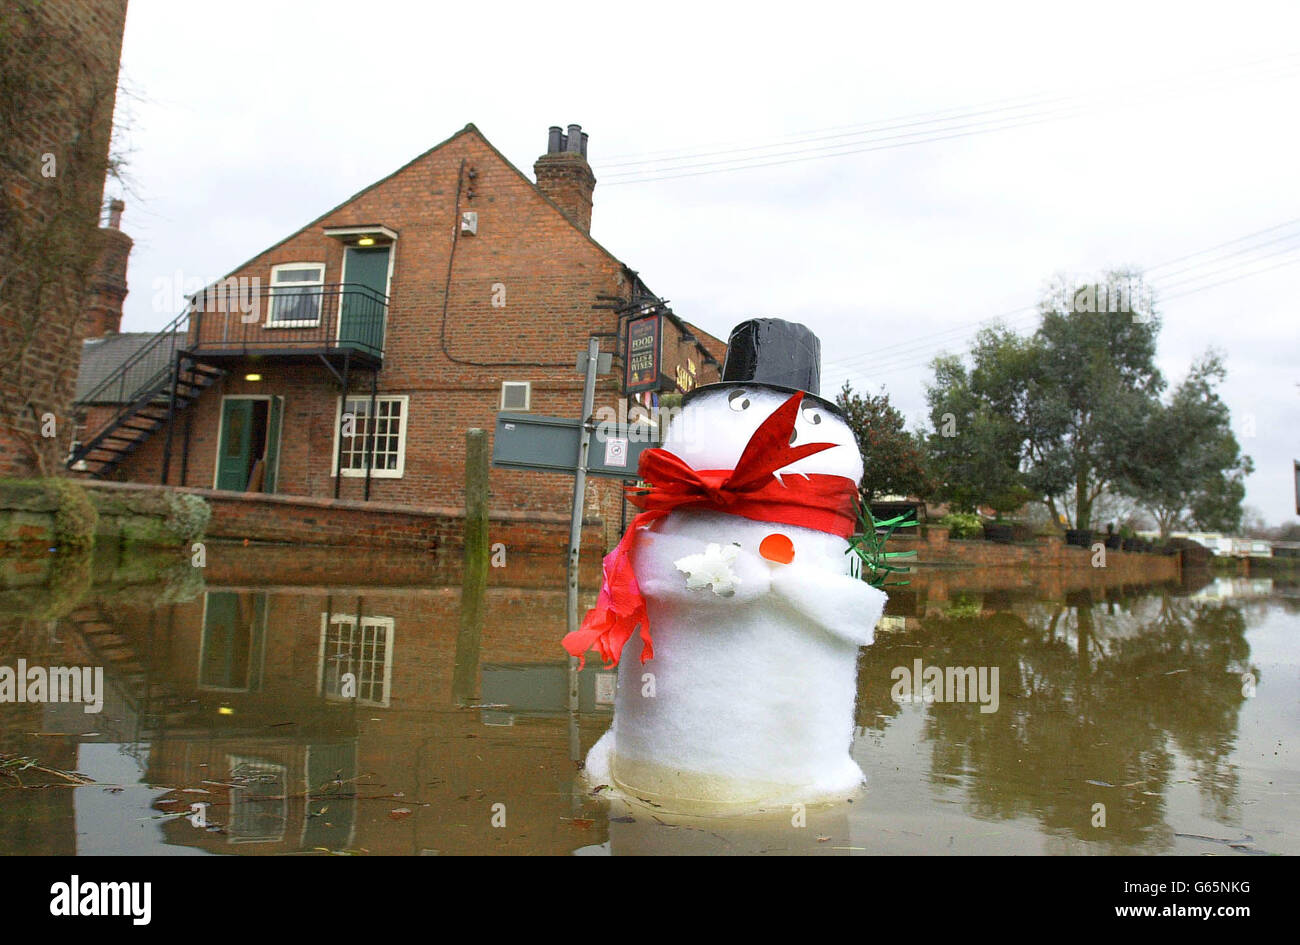 The scene in Acaster, near York, as the area is flooded after heavy rains. Stock Photo